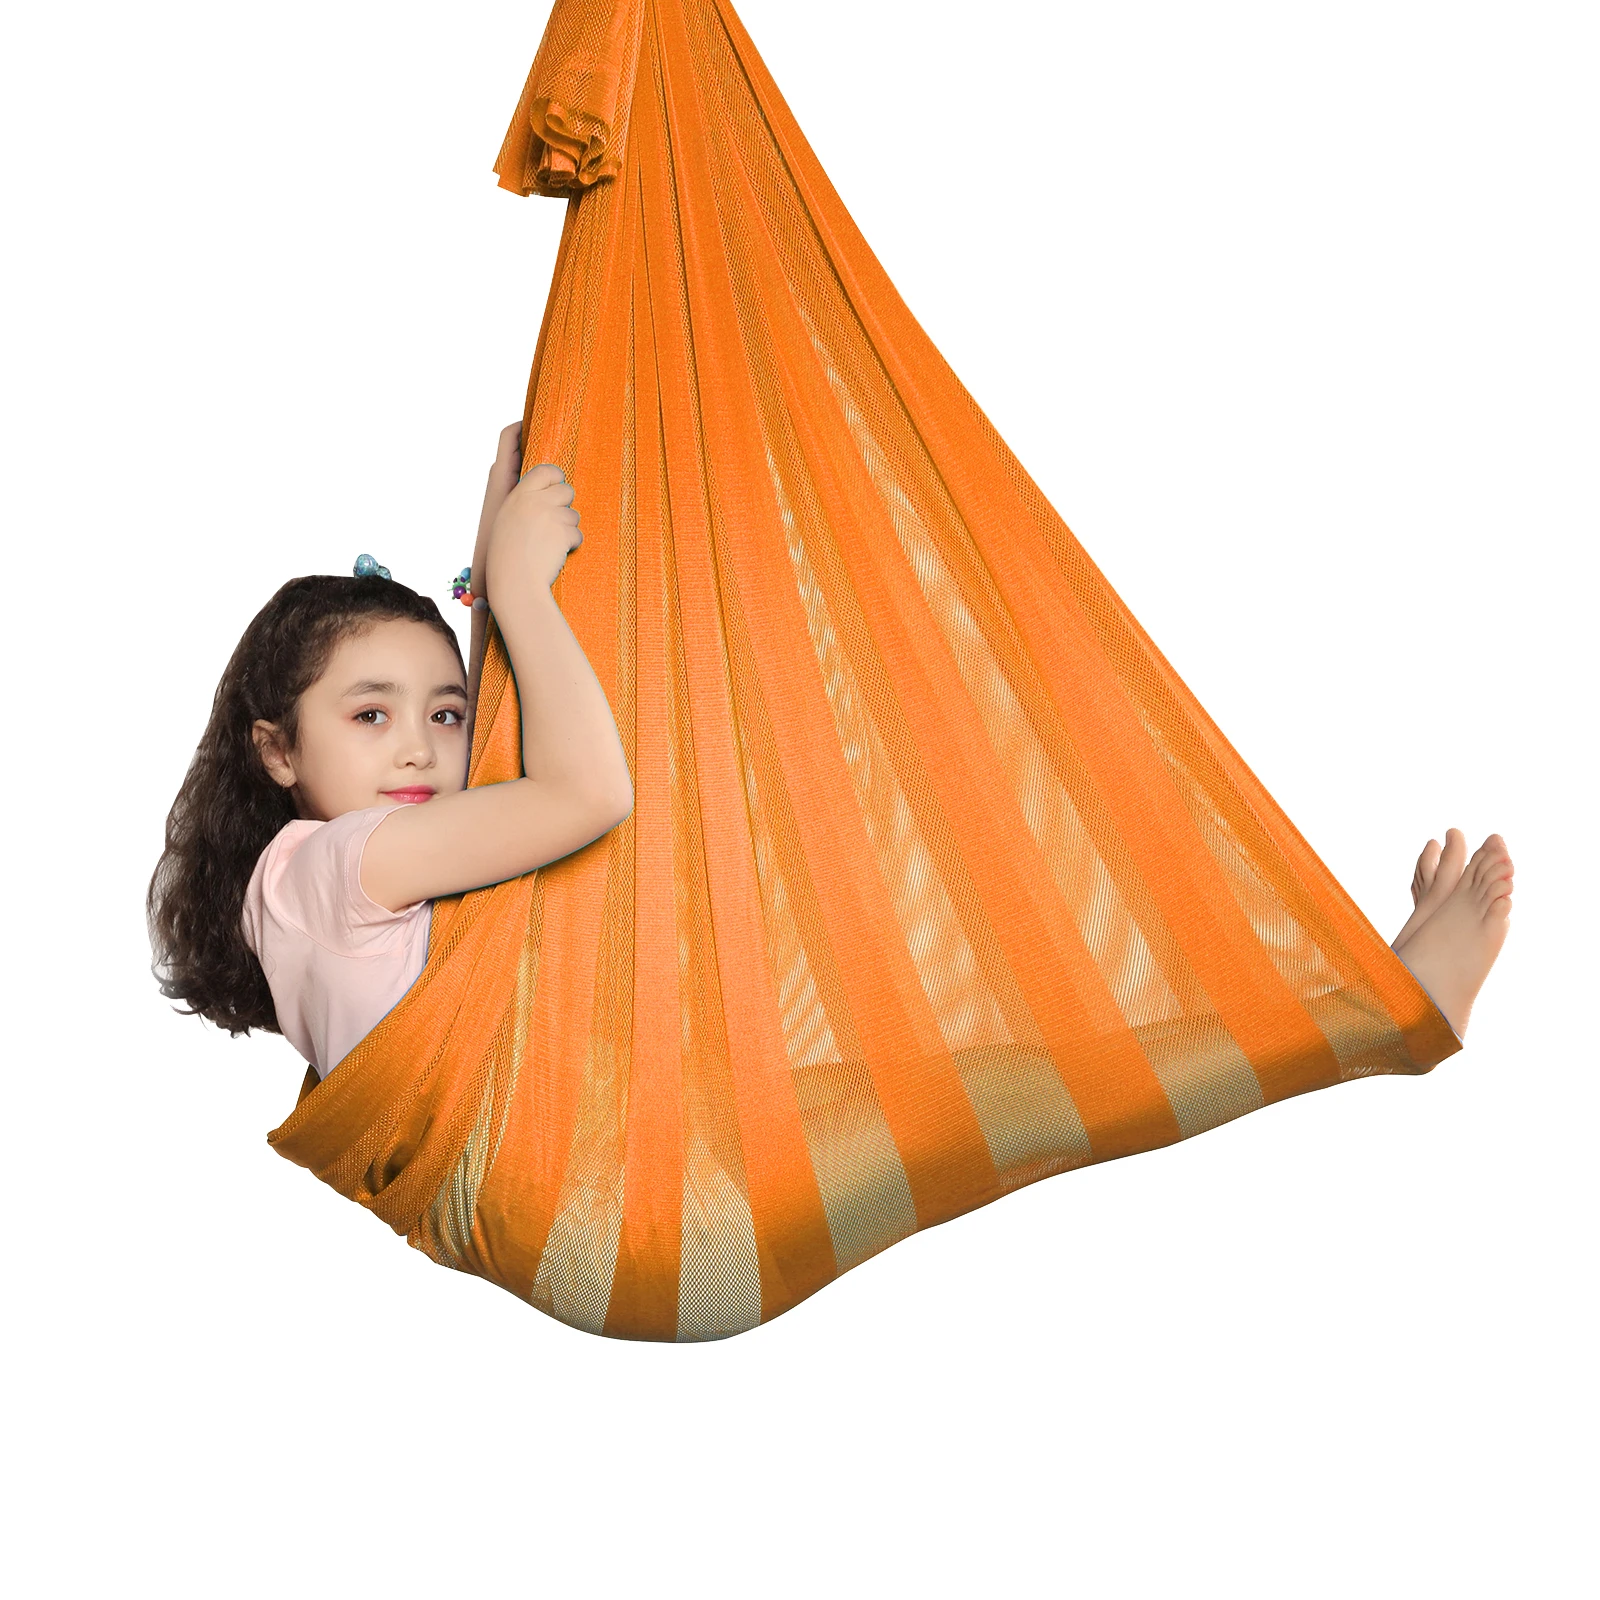 Therapy Swing for Kids Indoor Sensory Swing Hammock for Children  Hanging Cuddle Hammock for Autism ADHD Asperger's Syndrome SPD